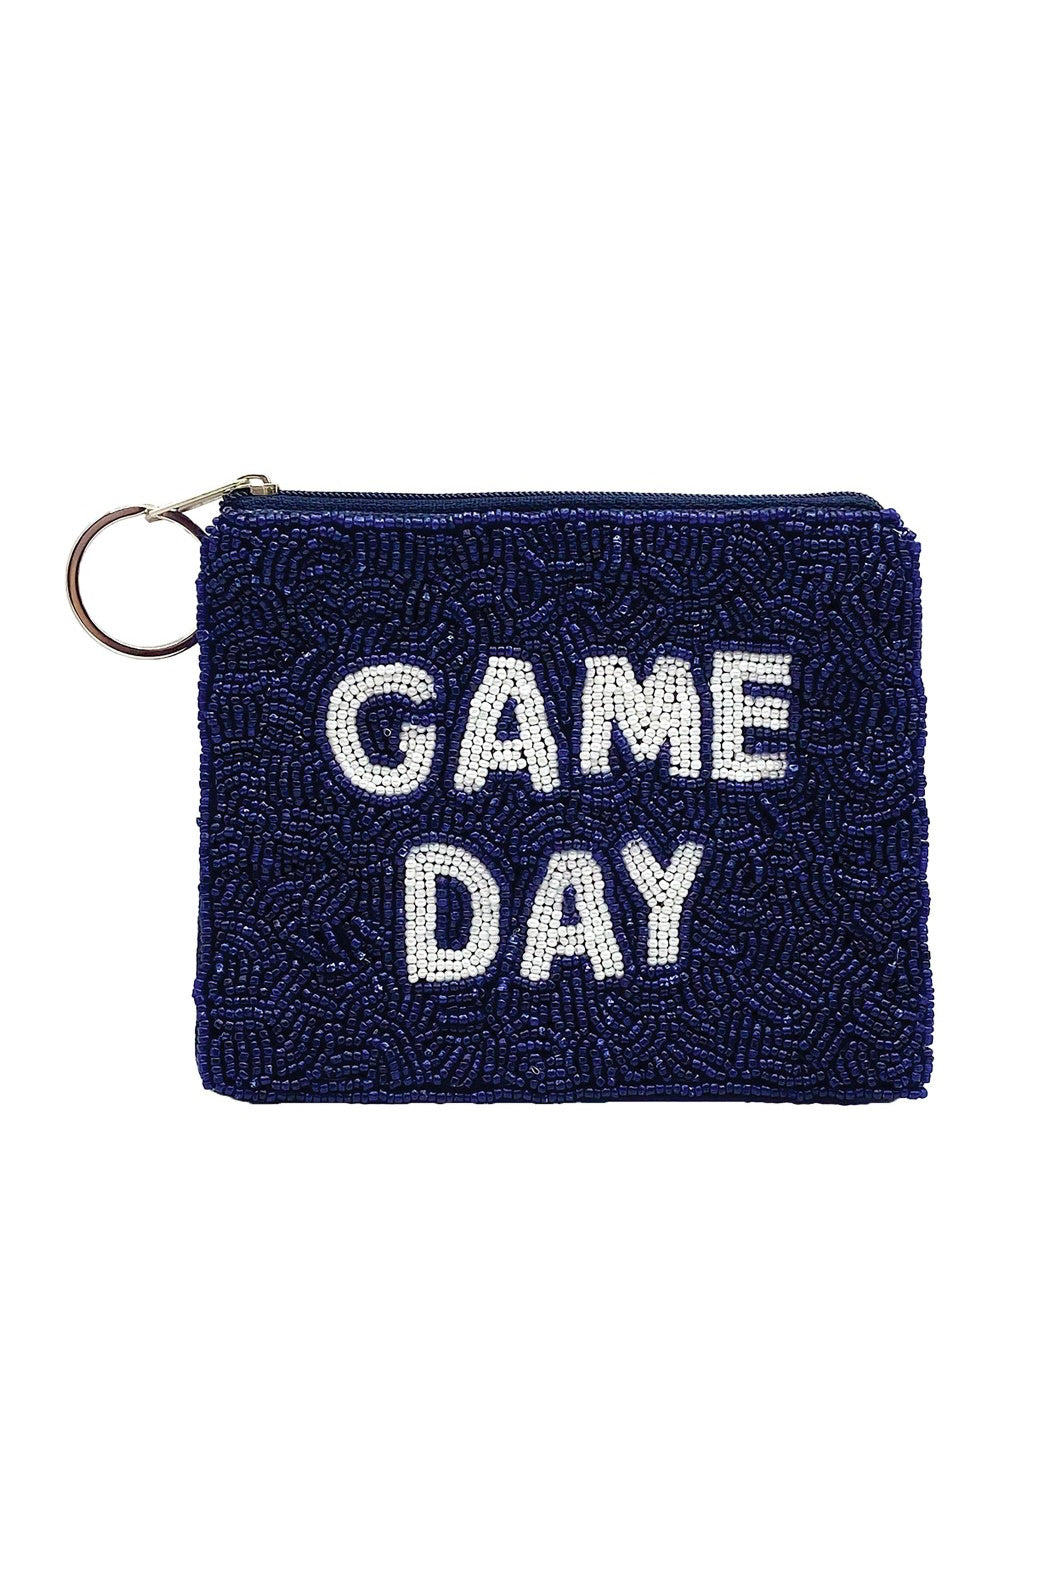 GAME DAY Beaded Pouch Bag